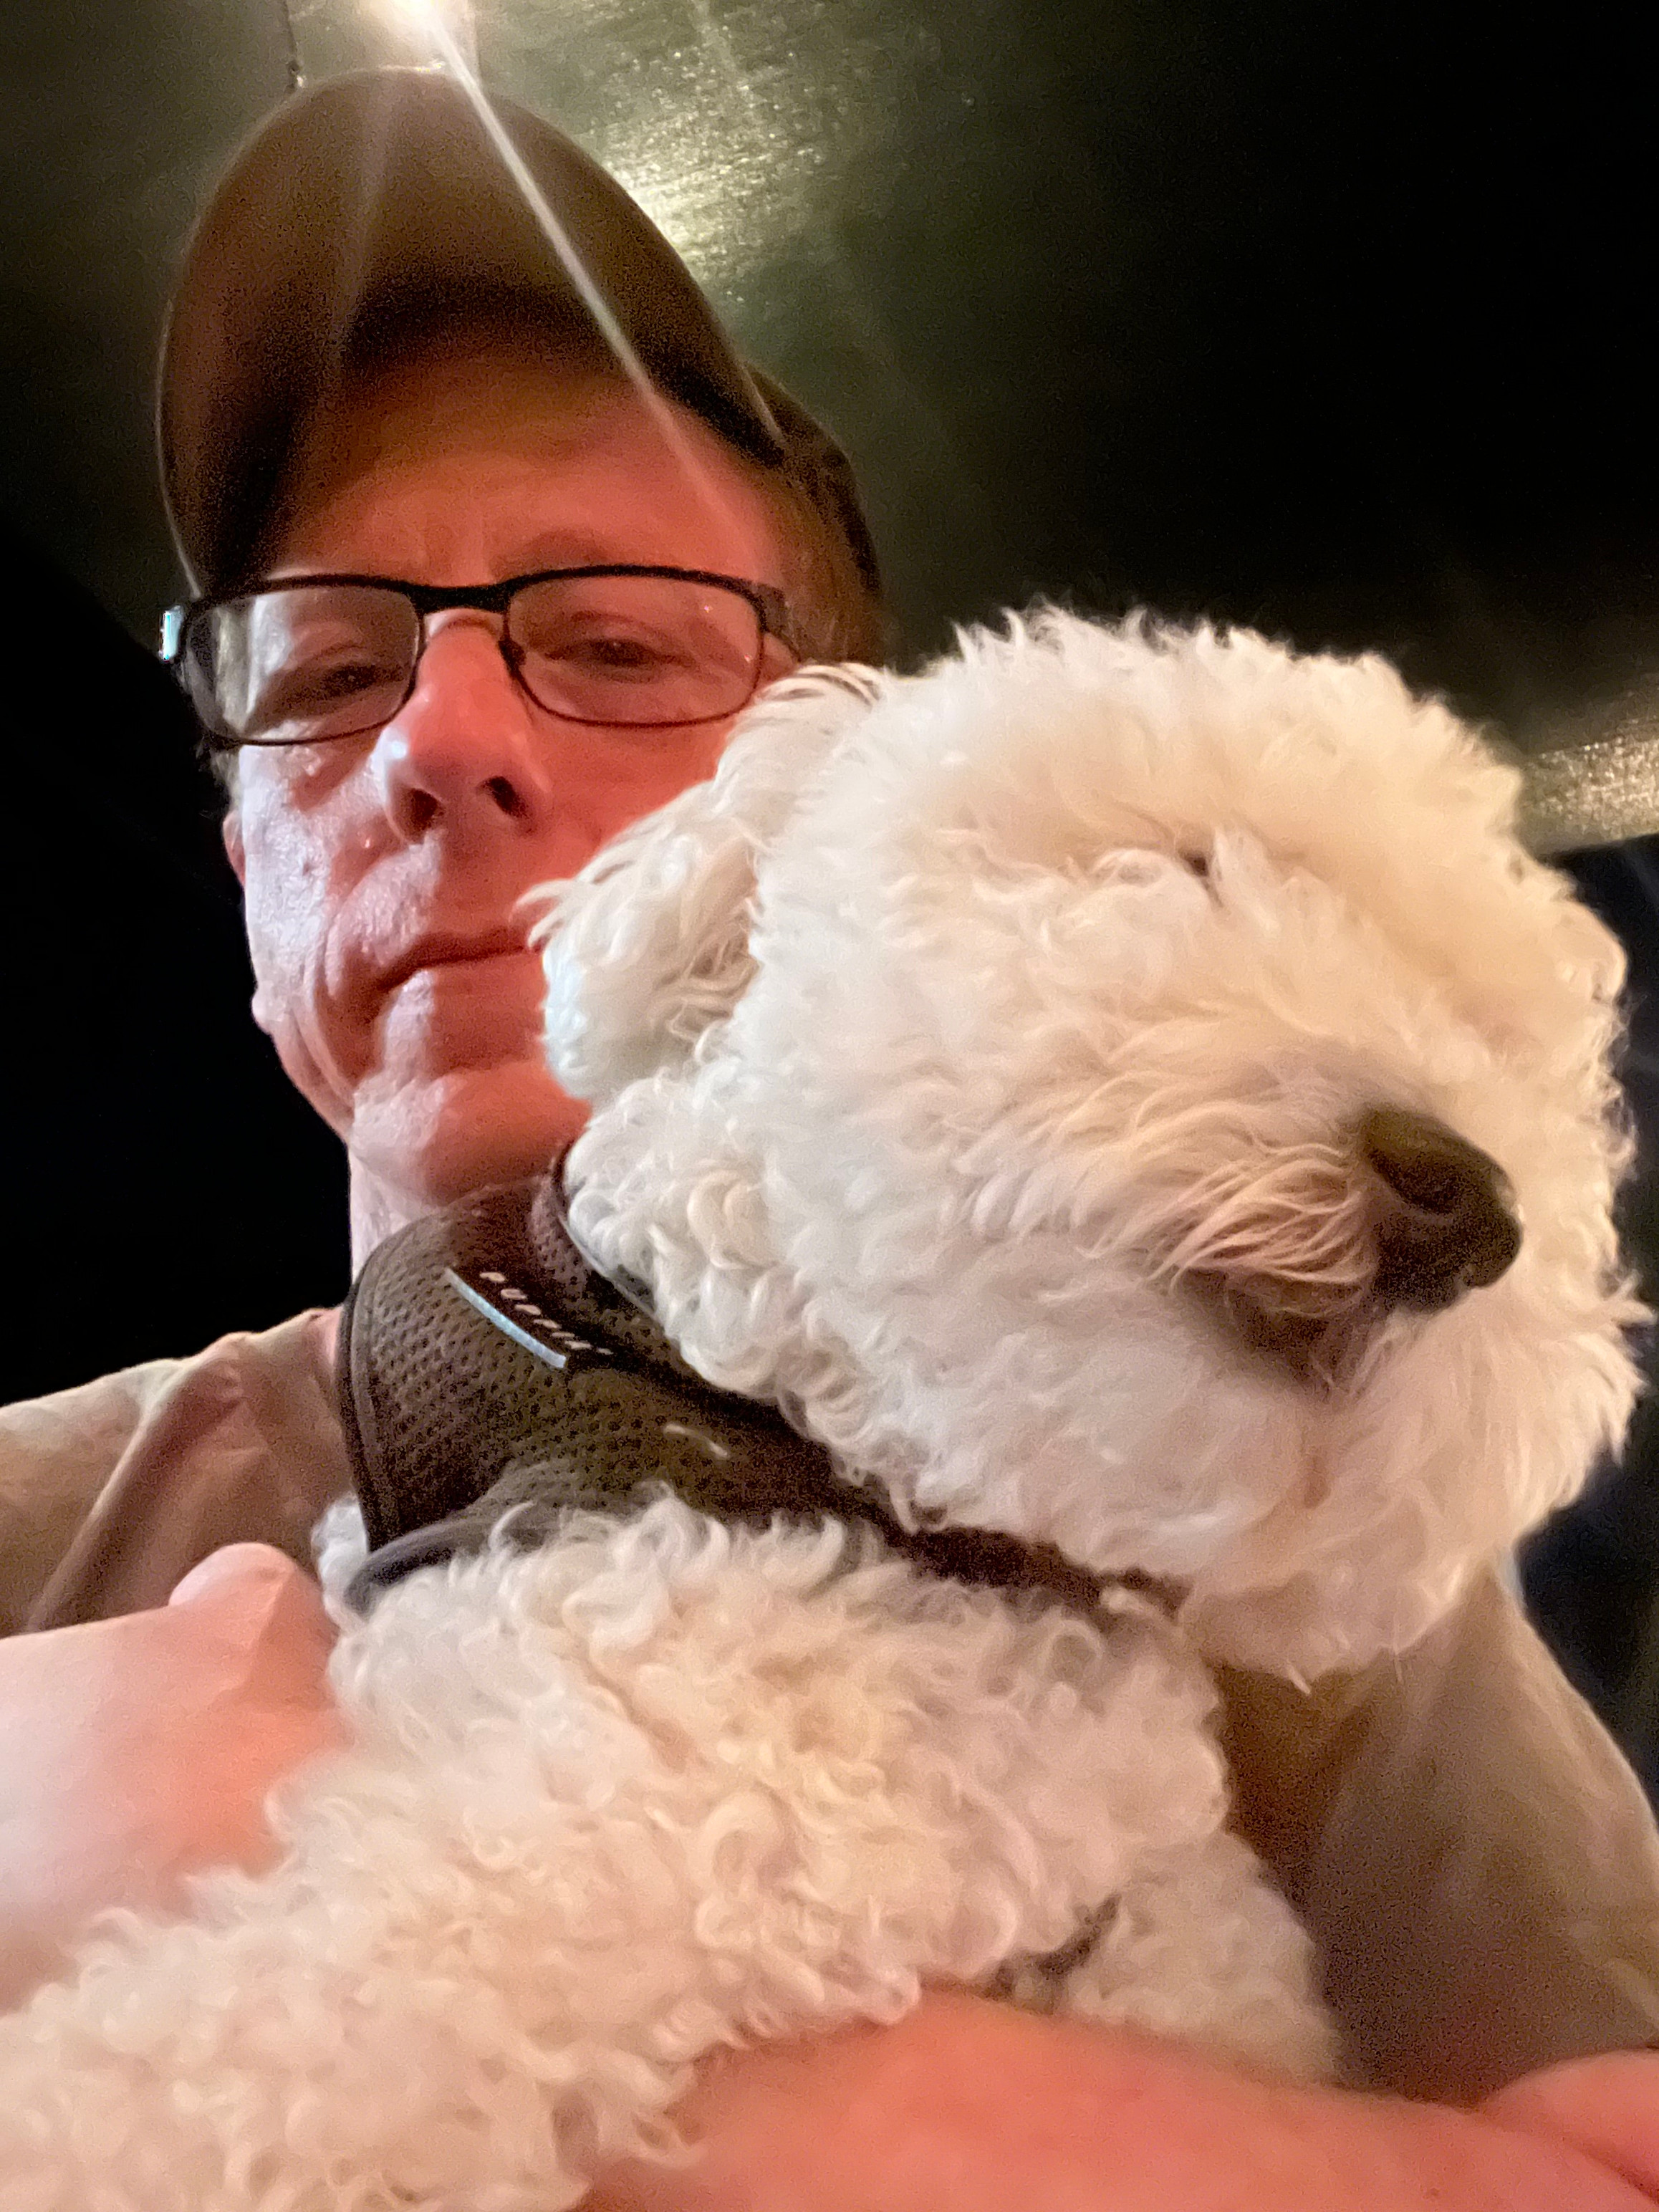 Me posing with the dog named "Walter Sobchak"